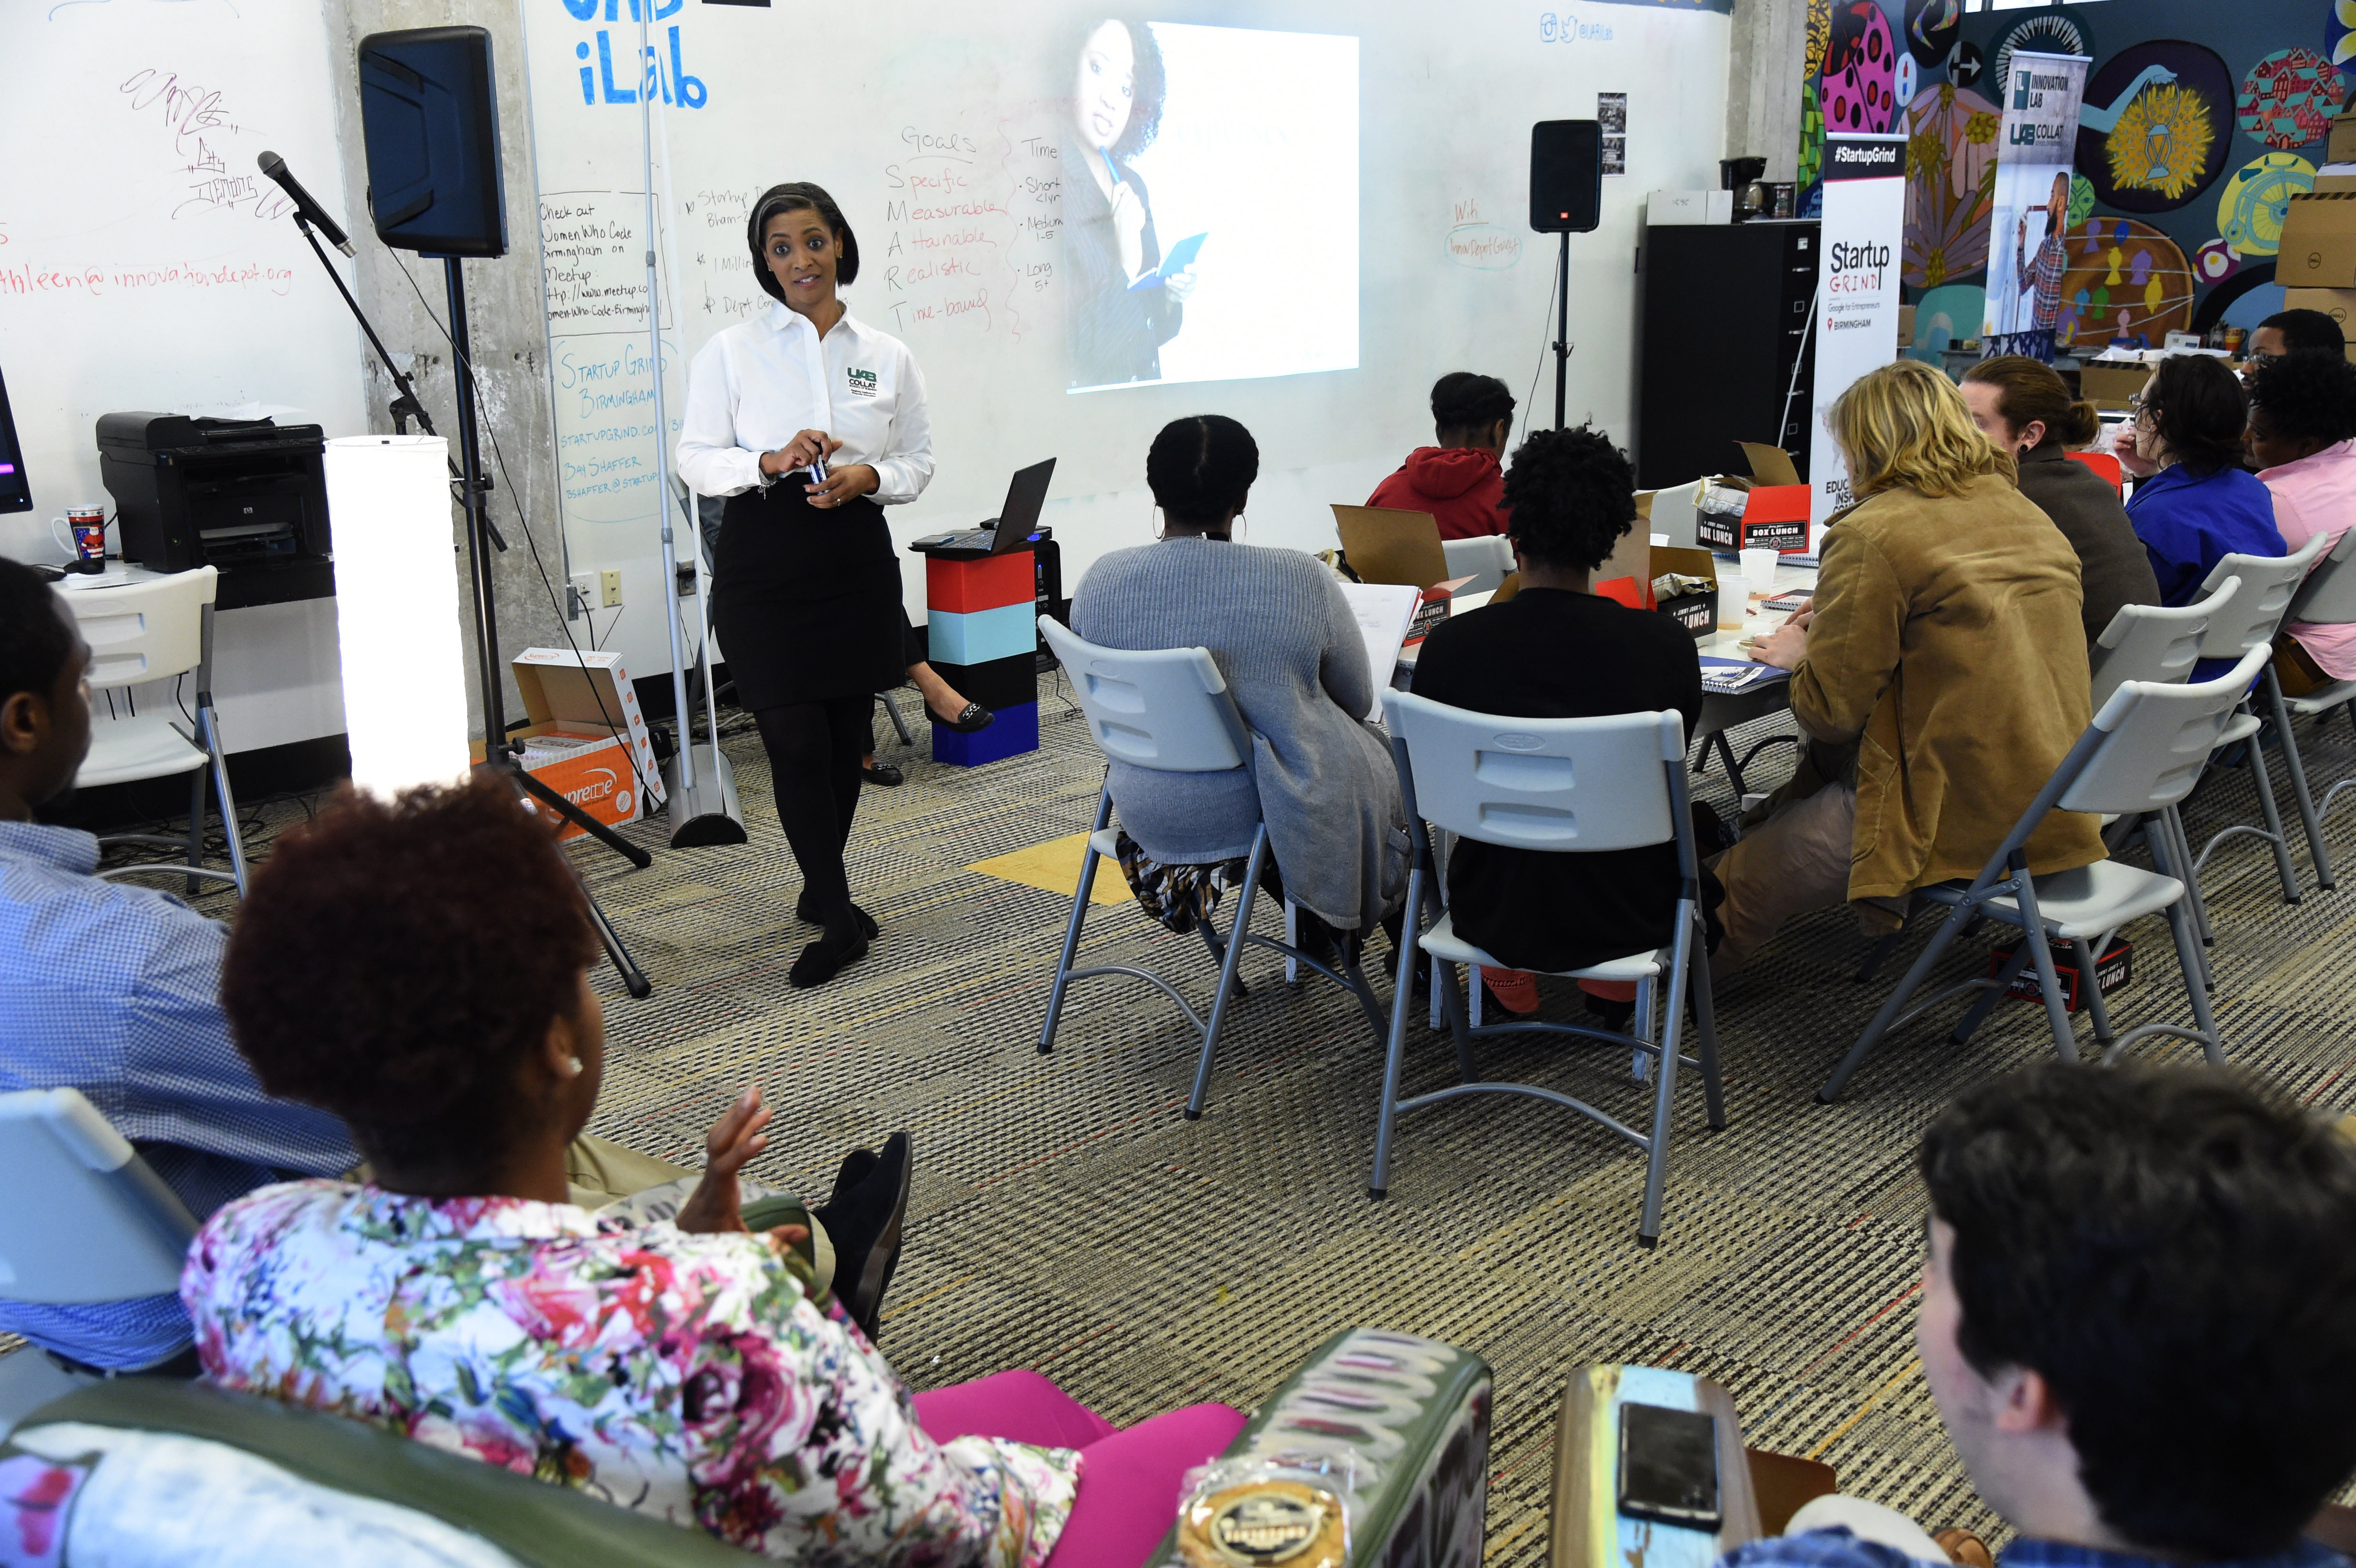 Stephanie Yates, director of the Regions Financial Institute at the UAB Collat School of Business, leads a lunch time discussion about financial literacy as part of a partnership program to help students earn CompTIA A+ certification needed for entry-level jobs in the IT field at the Innovation Depot in Birmingham, Ala., Friday, Feb. 17, 2017. (Mark Almond, for The Birmingham Times)